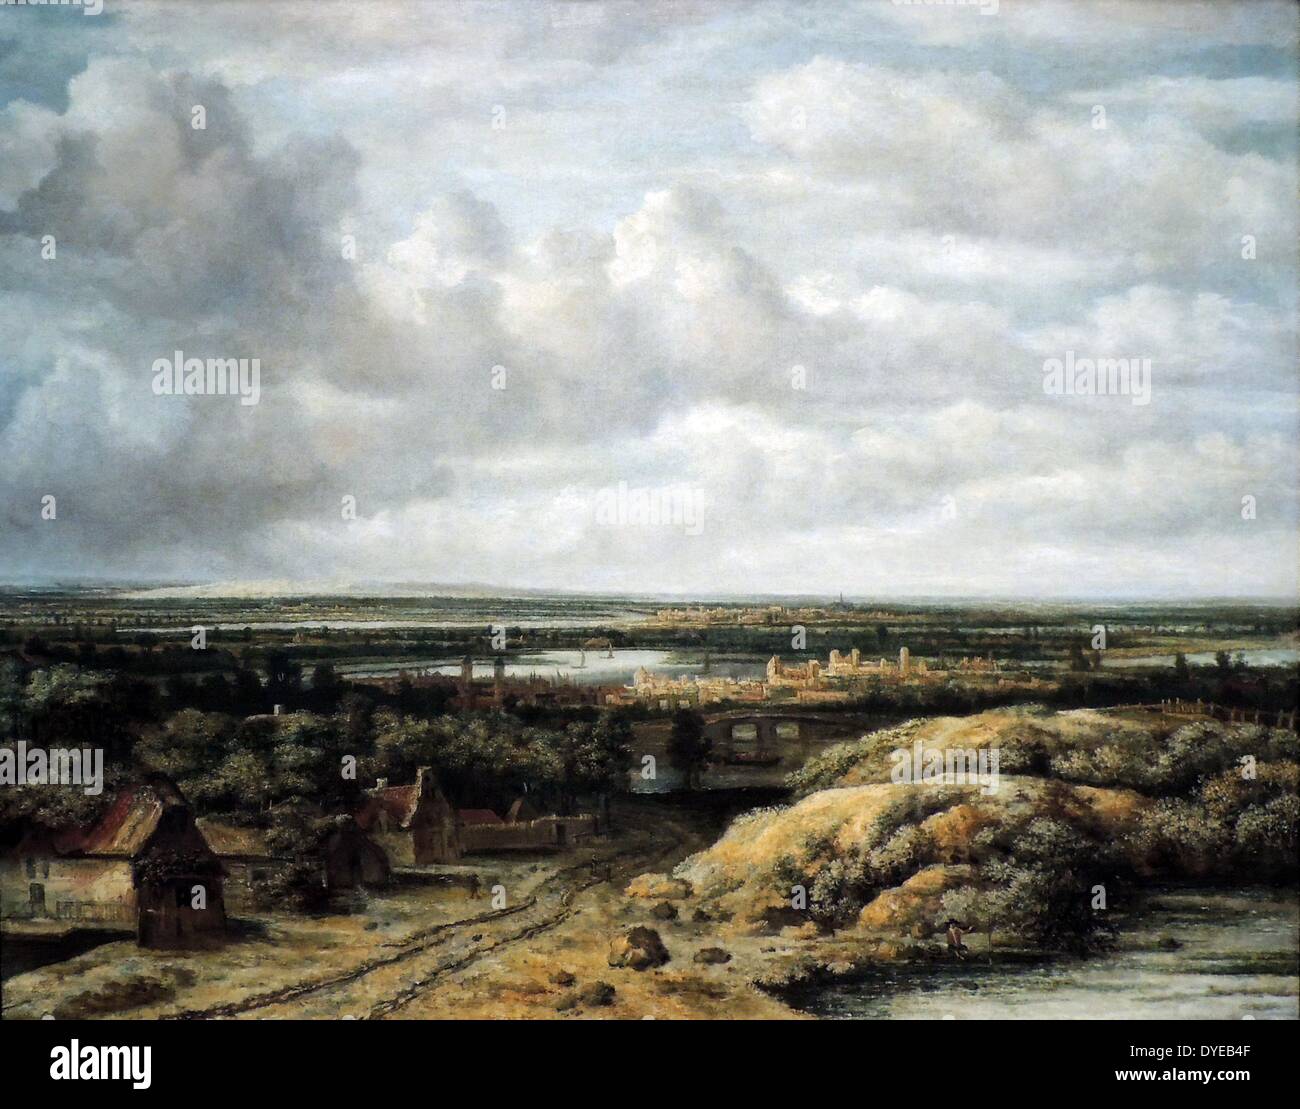 Distant view with Cottages along a Road by Philips Koninck (1619-1688) oil on canvas, 1655. A few dunes provide the only relief in this otherwise sweeping landscape stretching out under a vast sky. Koninck specialized in flat landscapes, which he built up with countless dots, like the knots in a tapestry. His palette and loose painting style reveal the influence of Rembrandt. The three cottages at the left are based on an etching by Rembrandt from 1650. Stock Photo